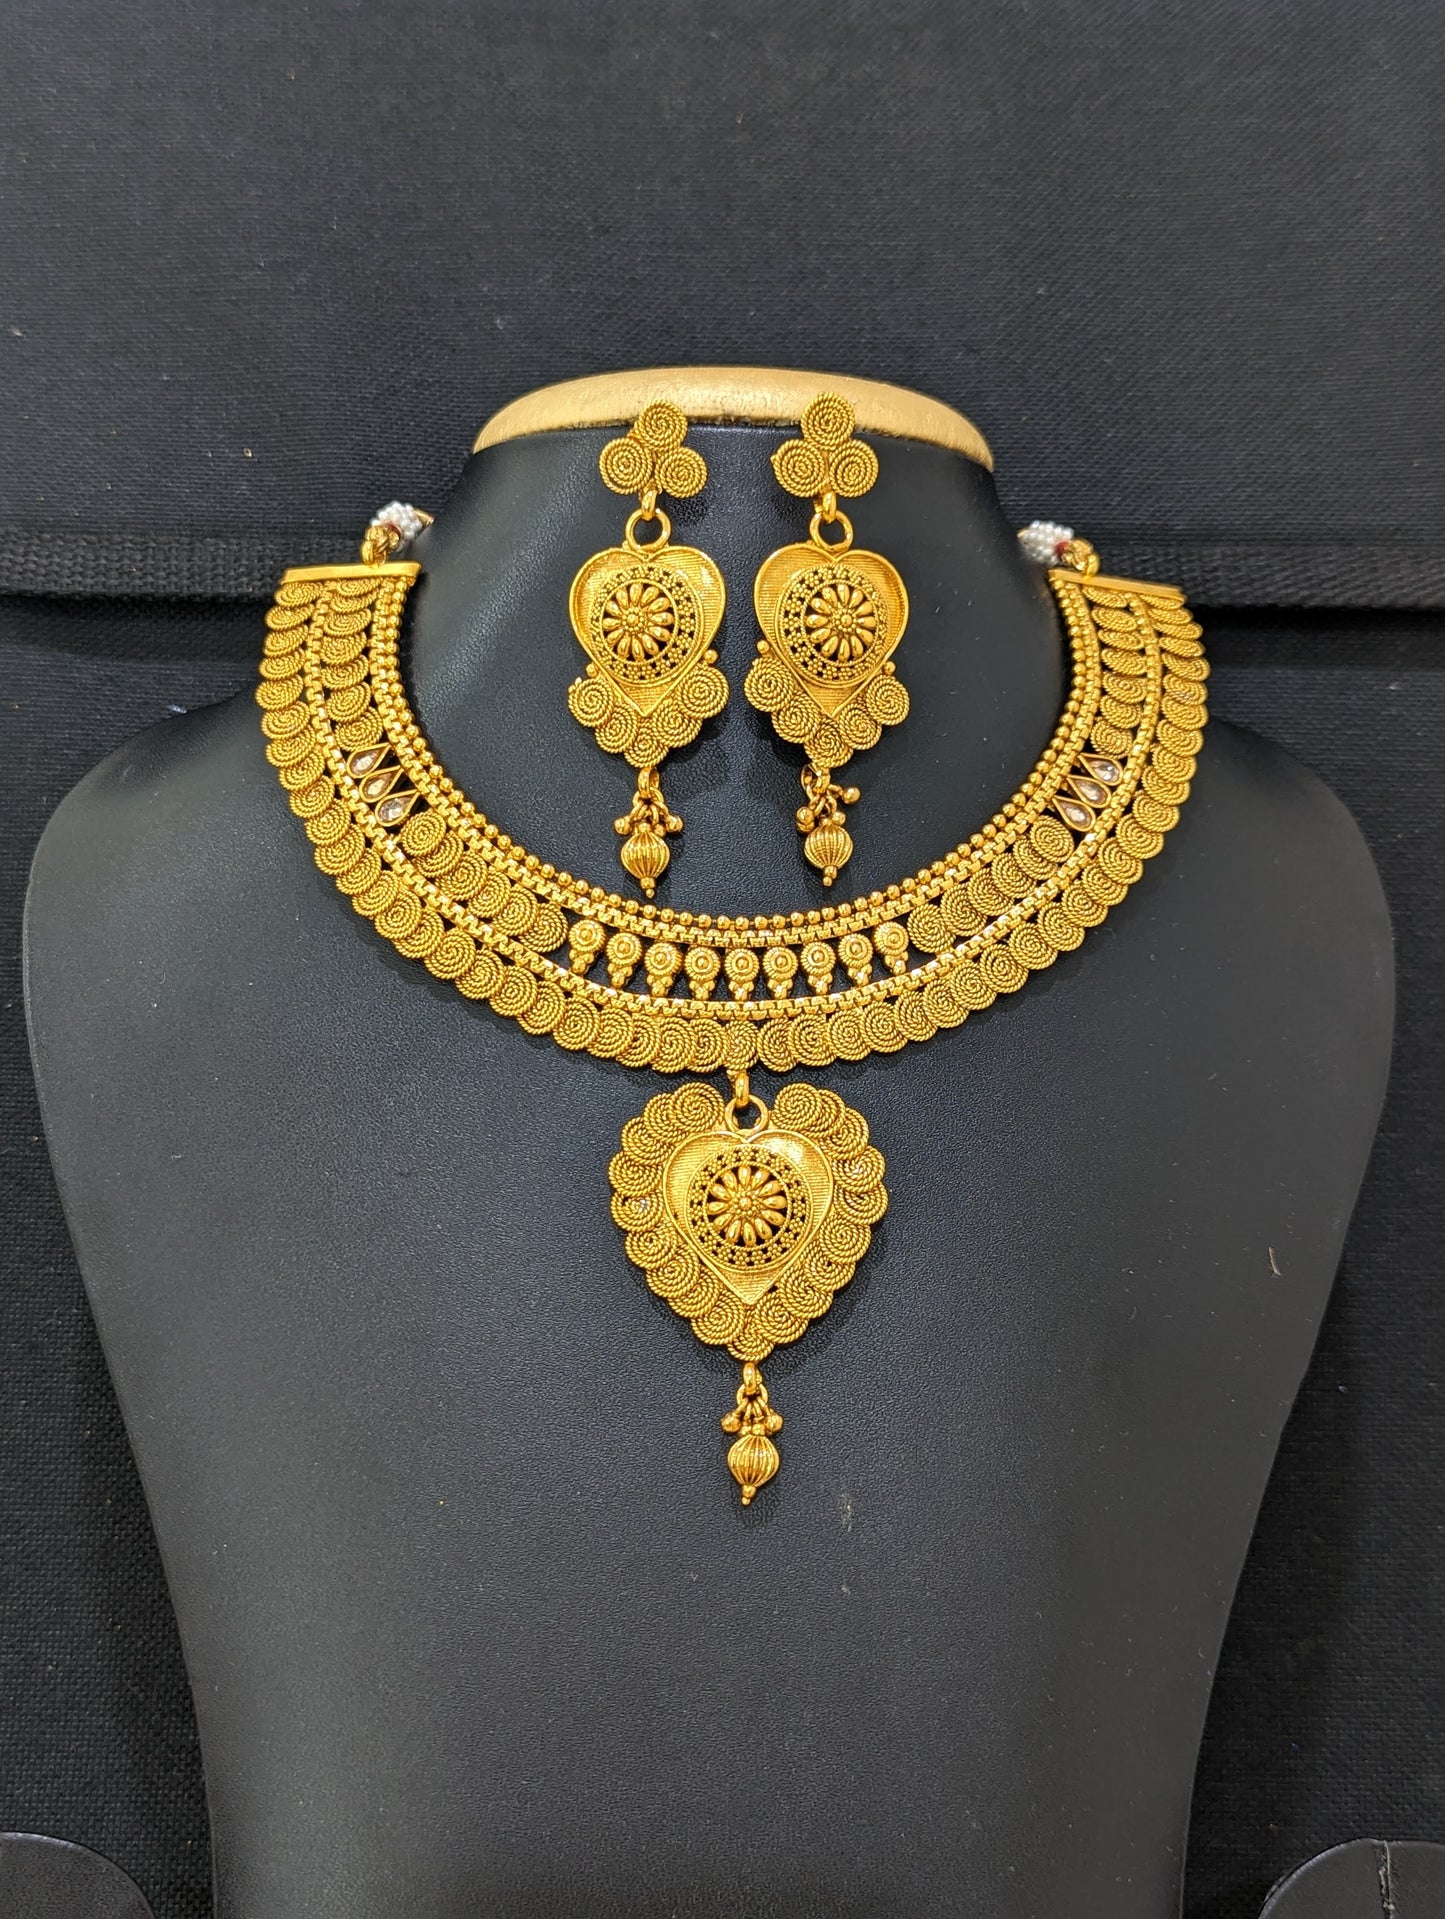 Real gold replica design Choker Necklace and Earrings set - Design 2